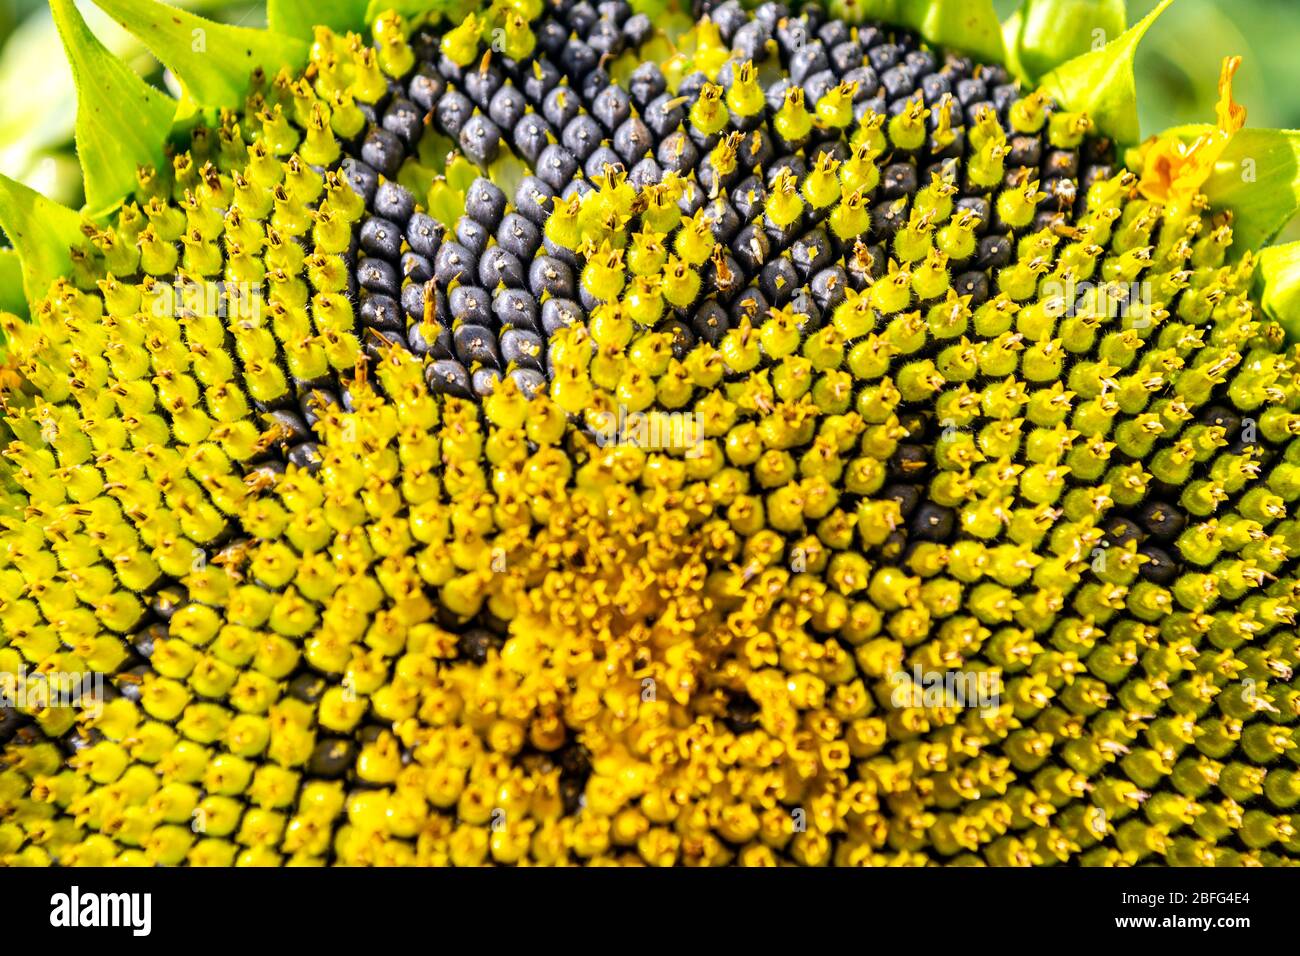 Close-up of a Sunflower head with seeds missing, Hitchin Lavender, UK Stock Photo